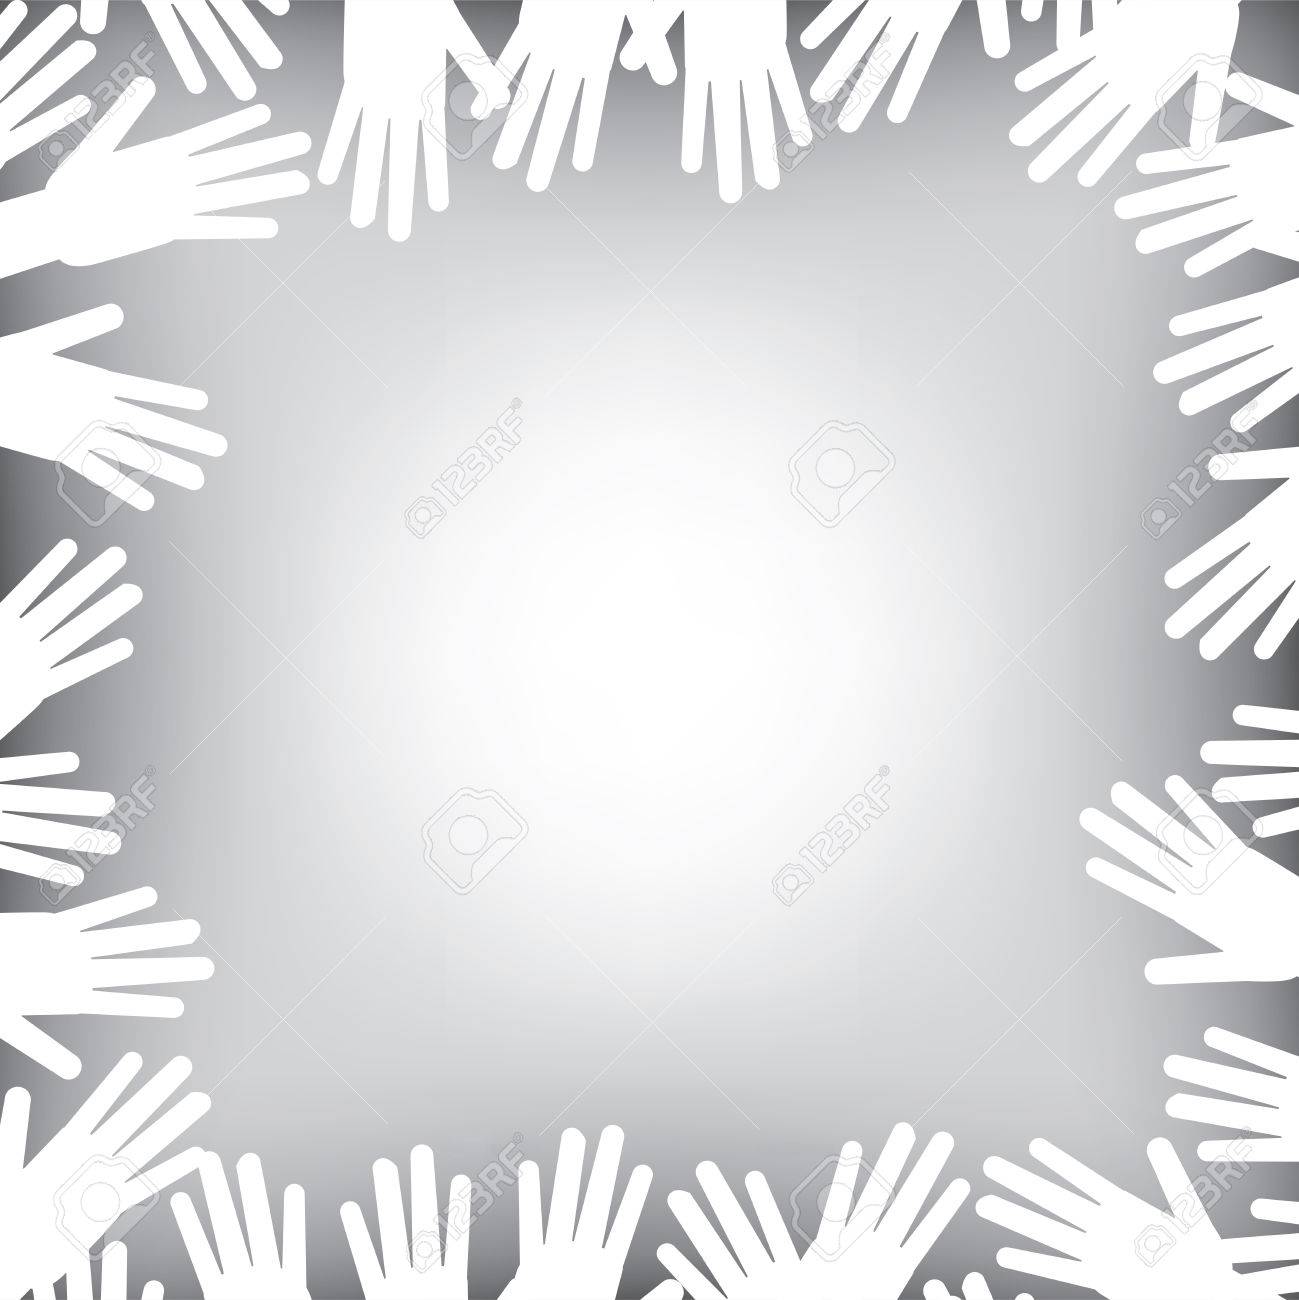 A Helping Hands Background In Black And White Royalty